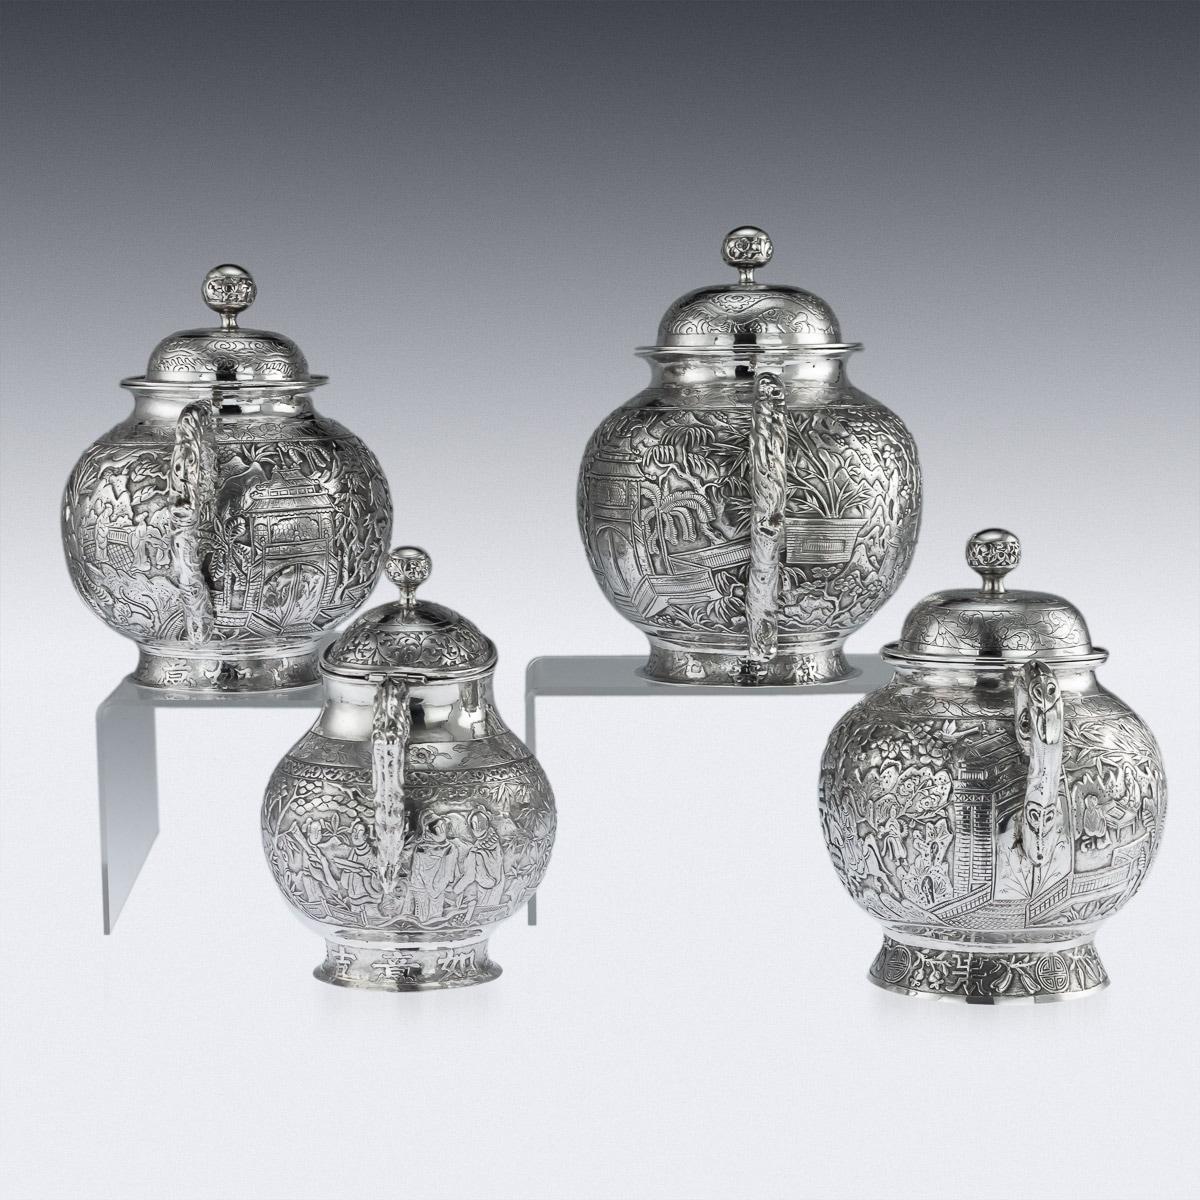 Antique 19th century Chinese impressive solid silver four-piece tea and coffee set, of traditional round form resting on a spreading base, decorated with Chinese calligraphy, the body finely and profusely chased with figures in a landscape, the